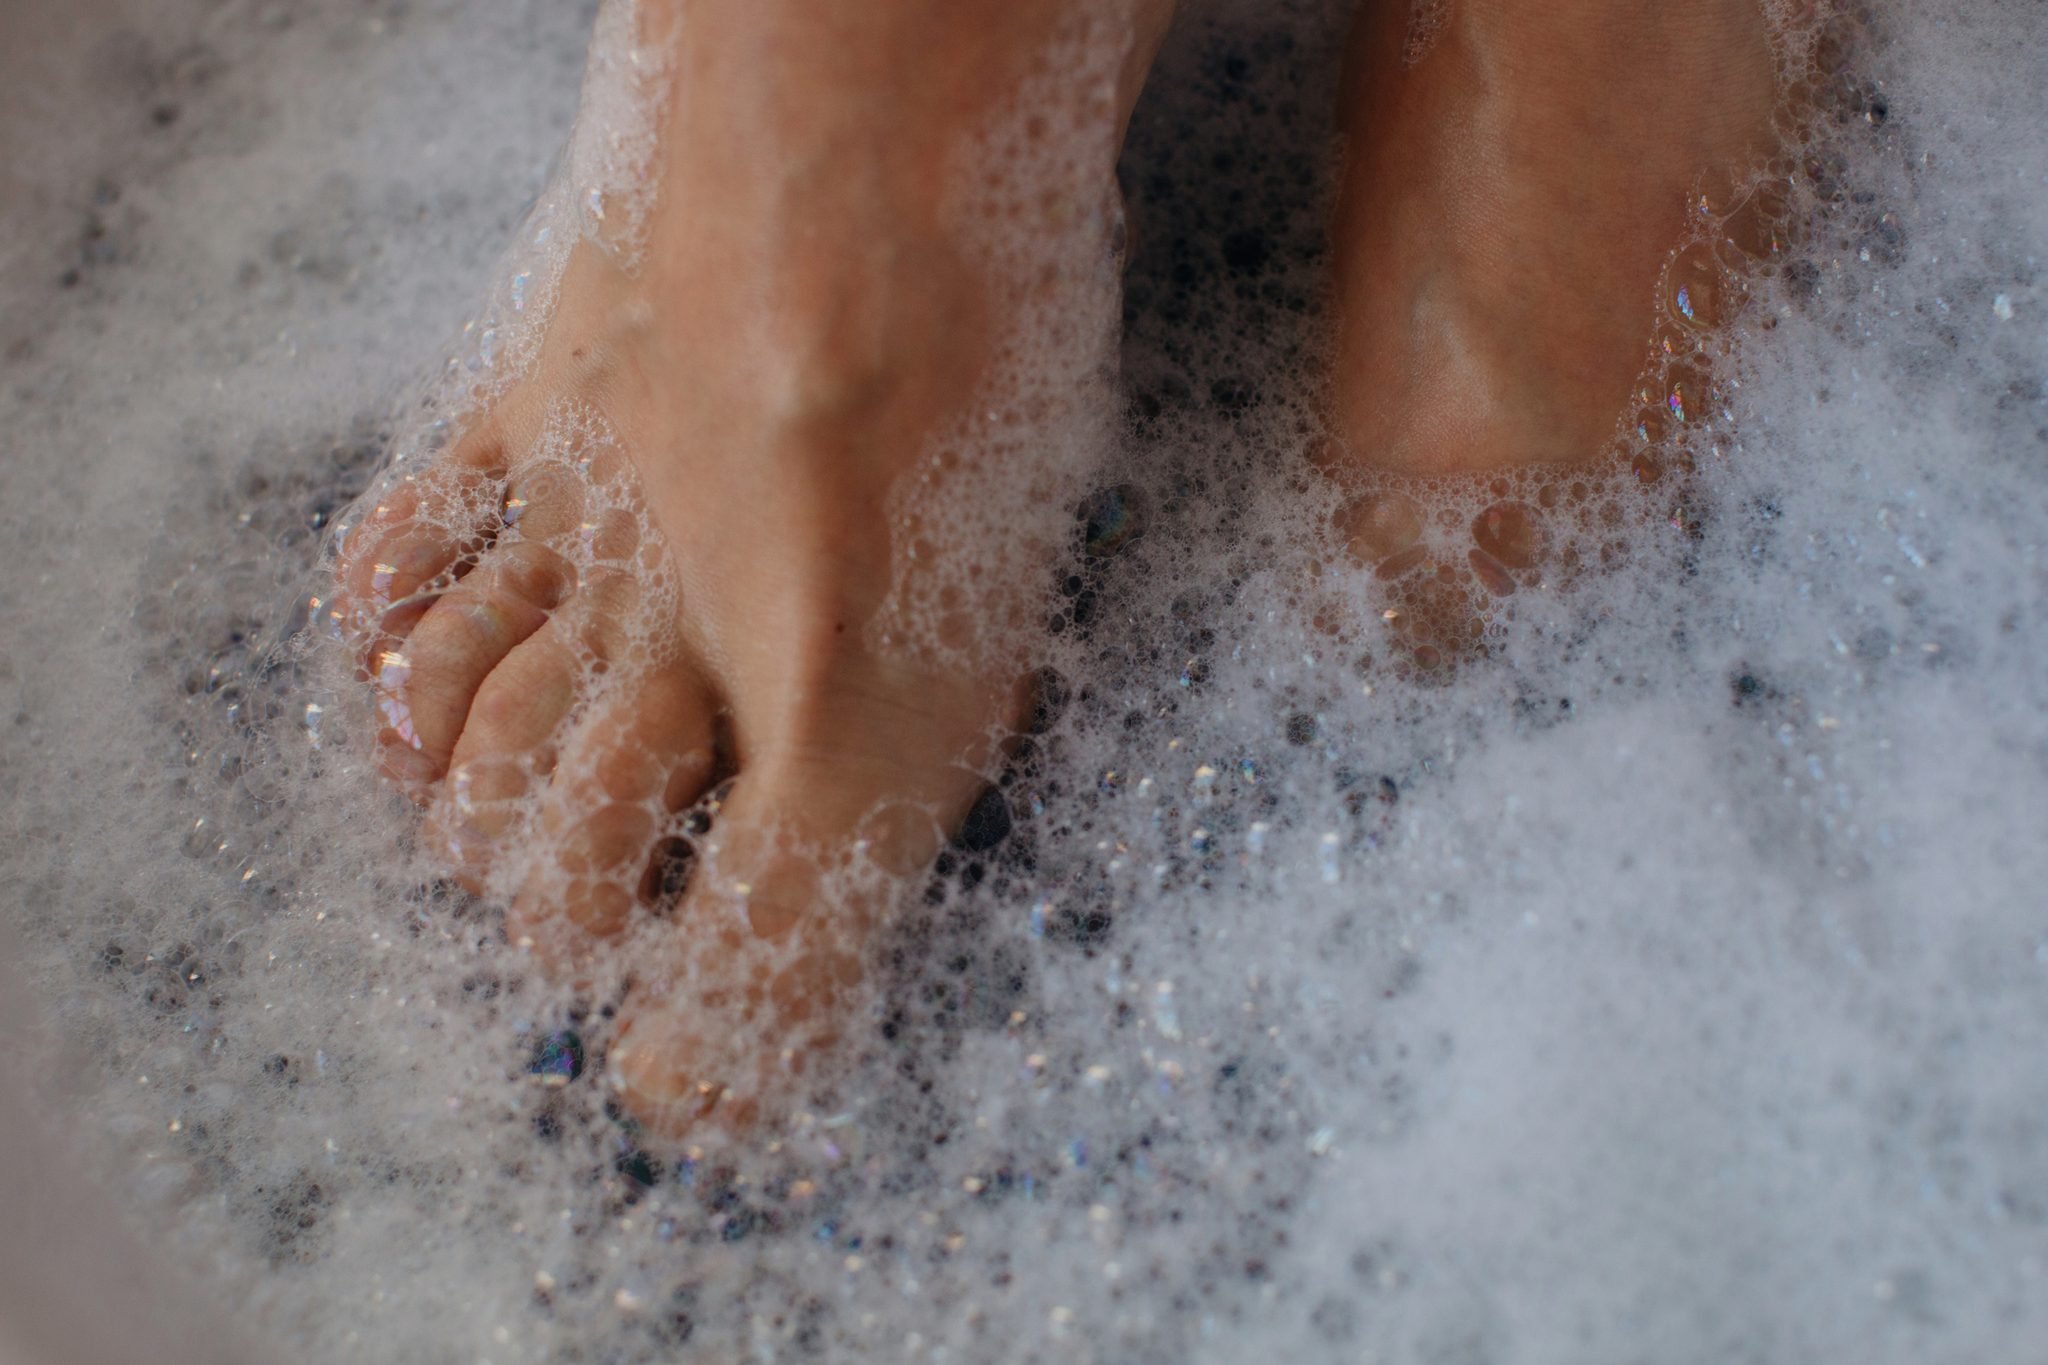 How To Do A Foot Soak For Toenail Fungus The Healthy 